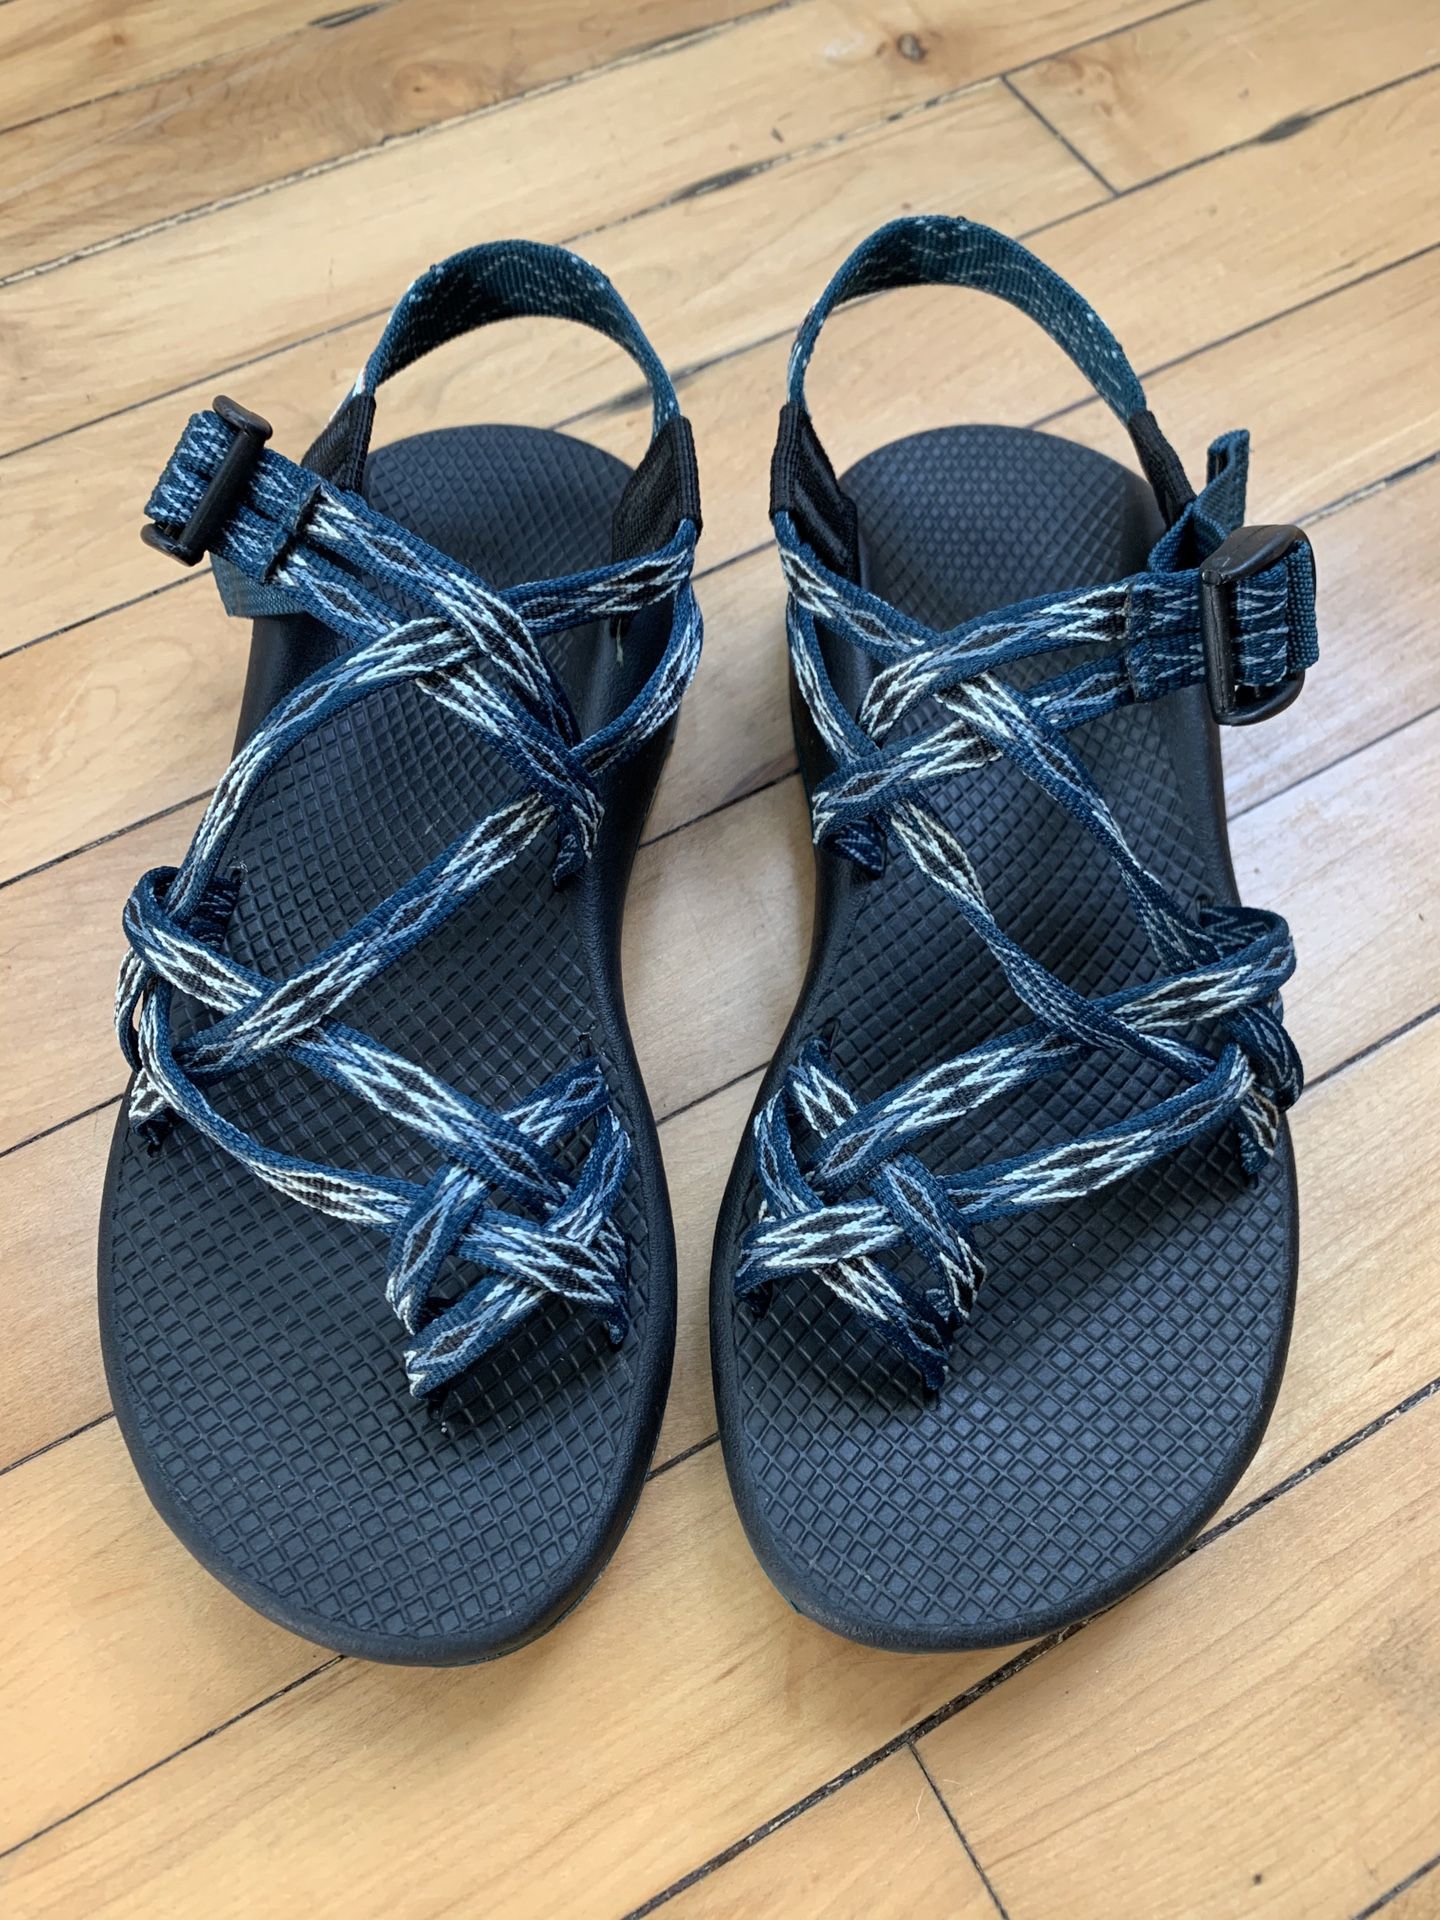 Women’s Chaco ZX/2 - Size 8